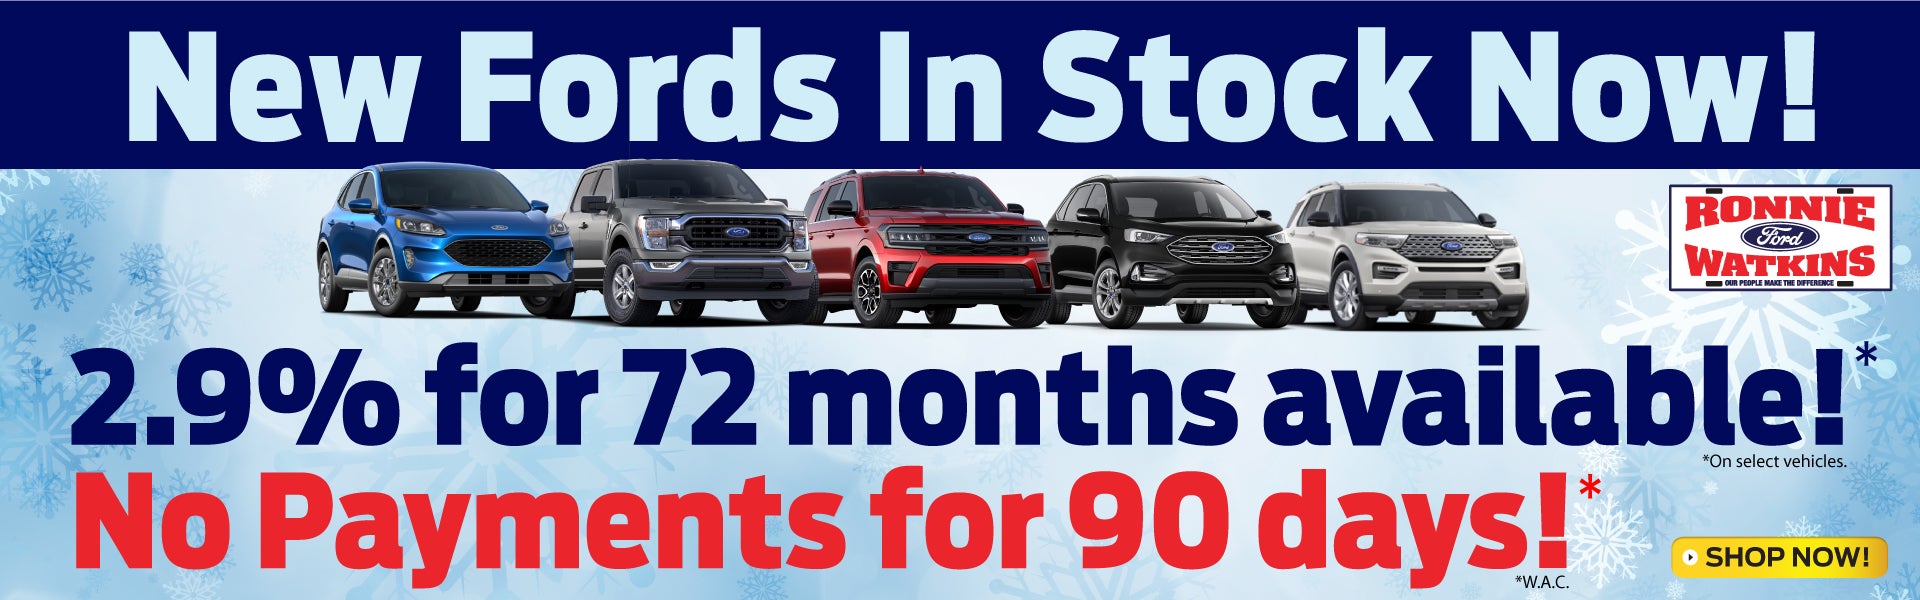 new fords in stock now!